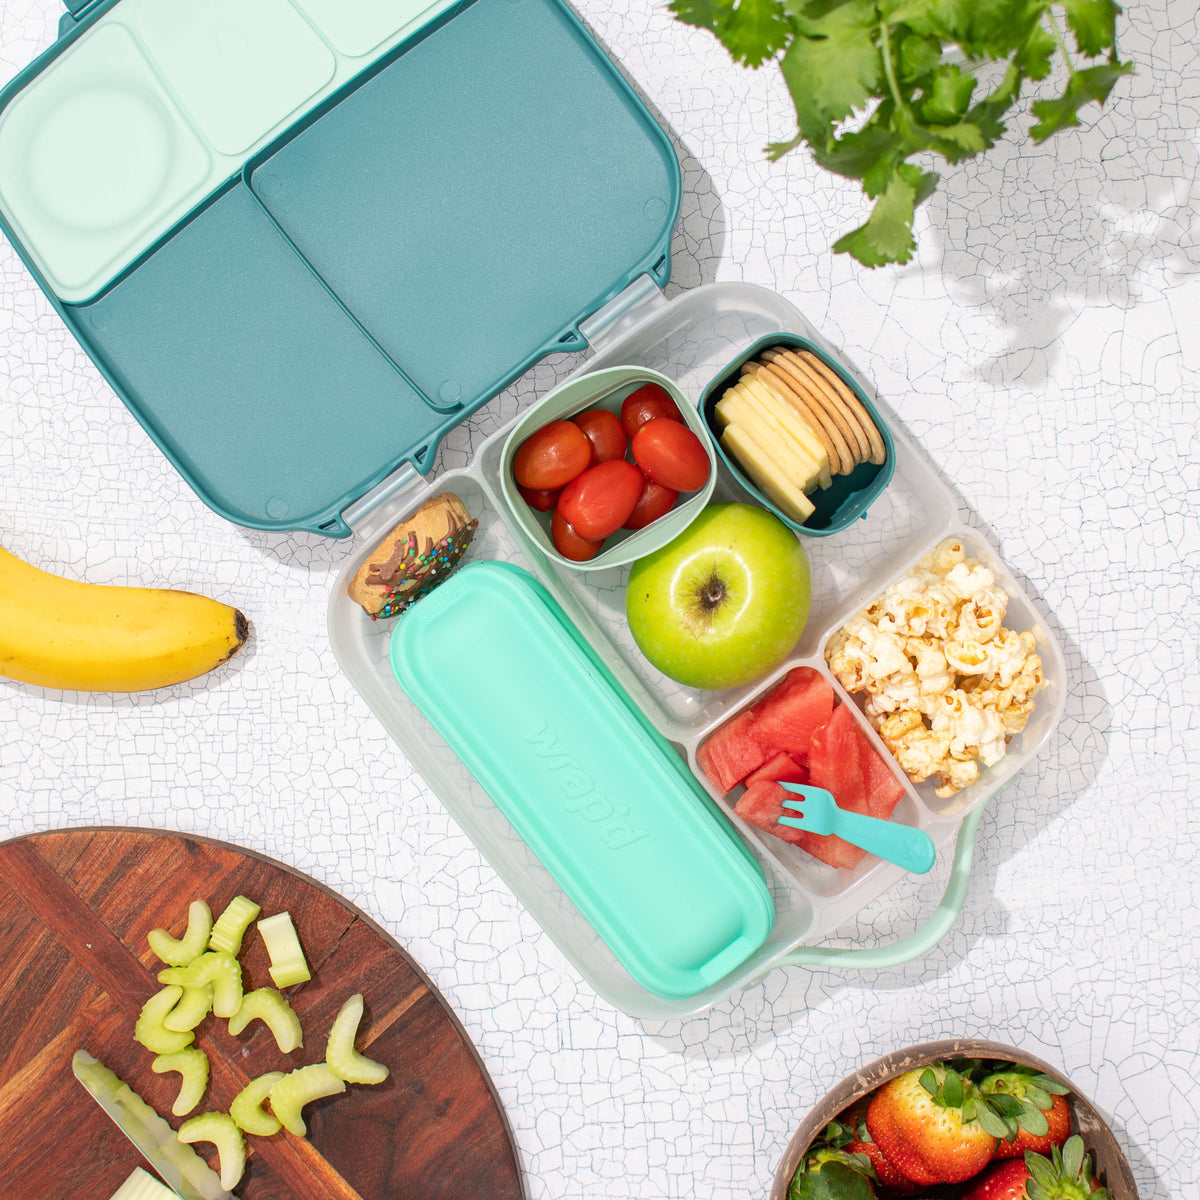 Insulated Food Jars! Which is best? #bbox #montiico #yumbox